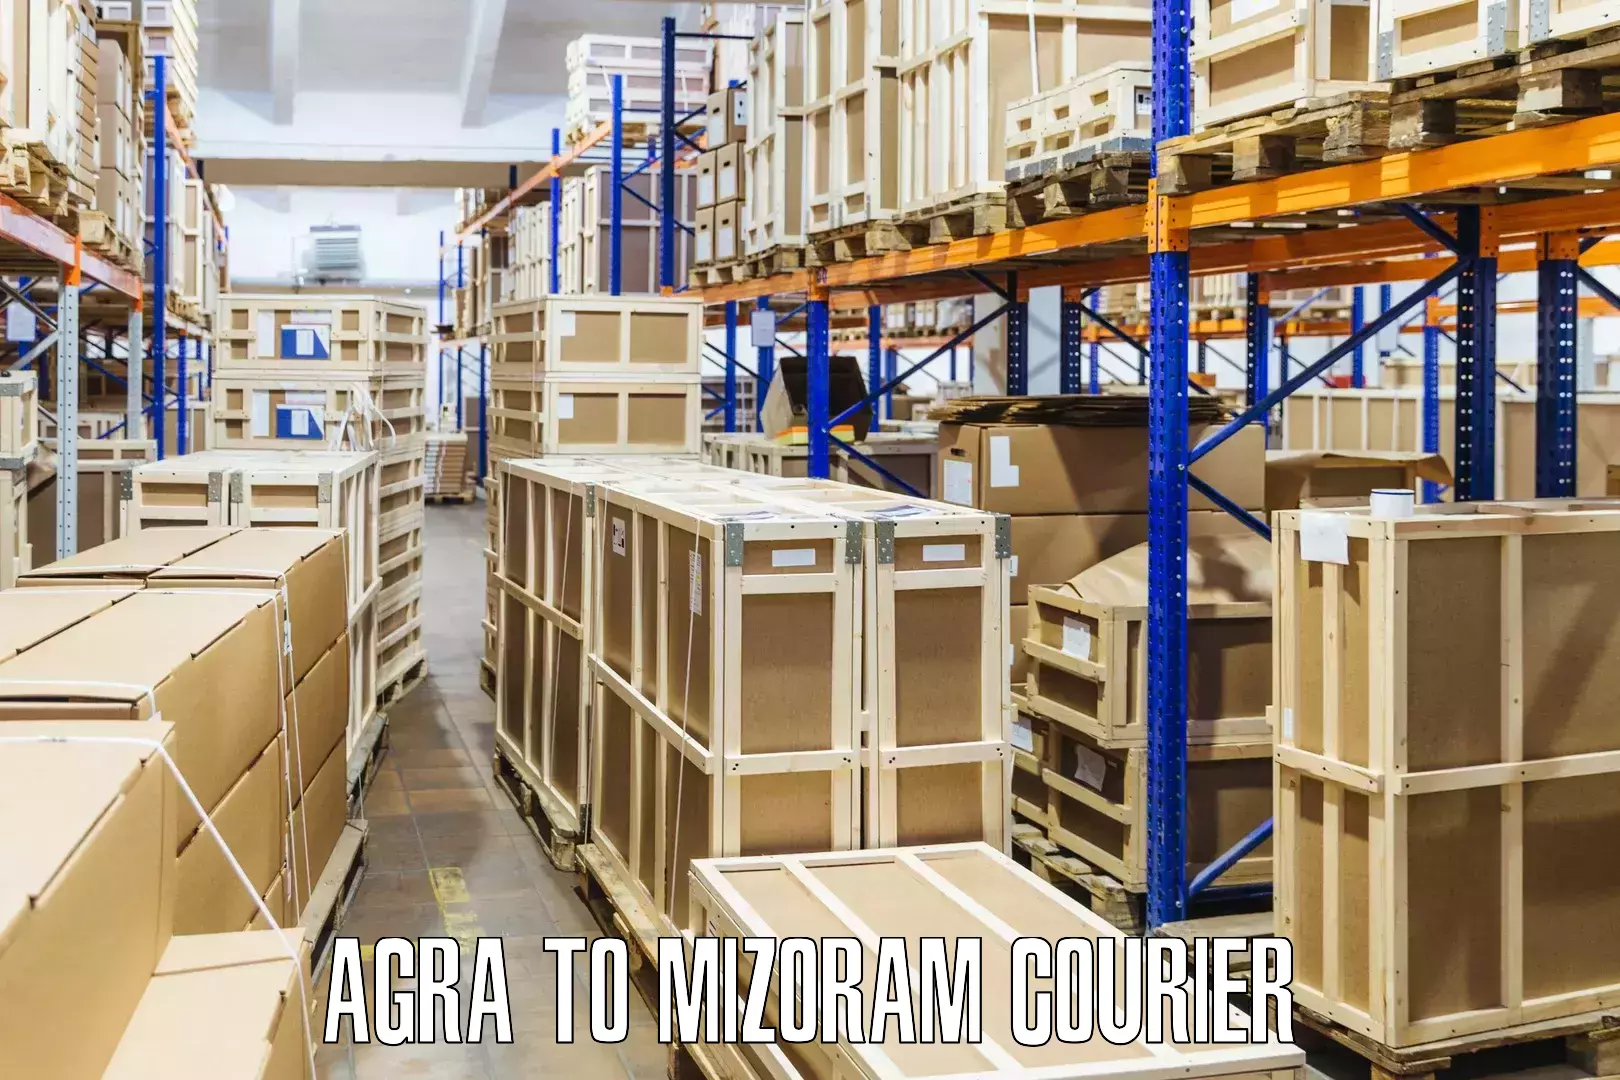 Courier app Agra to Darlawn